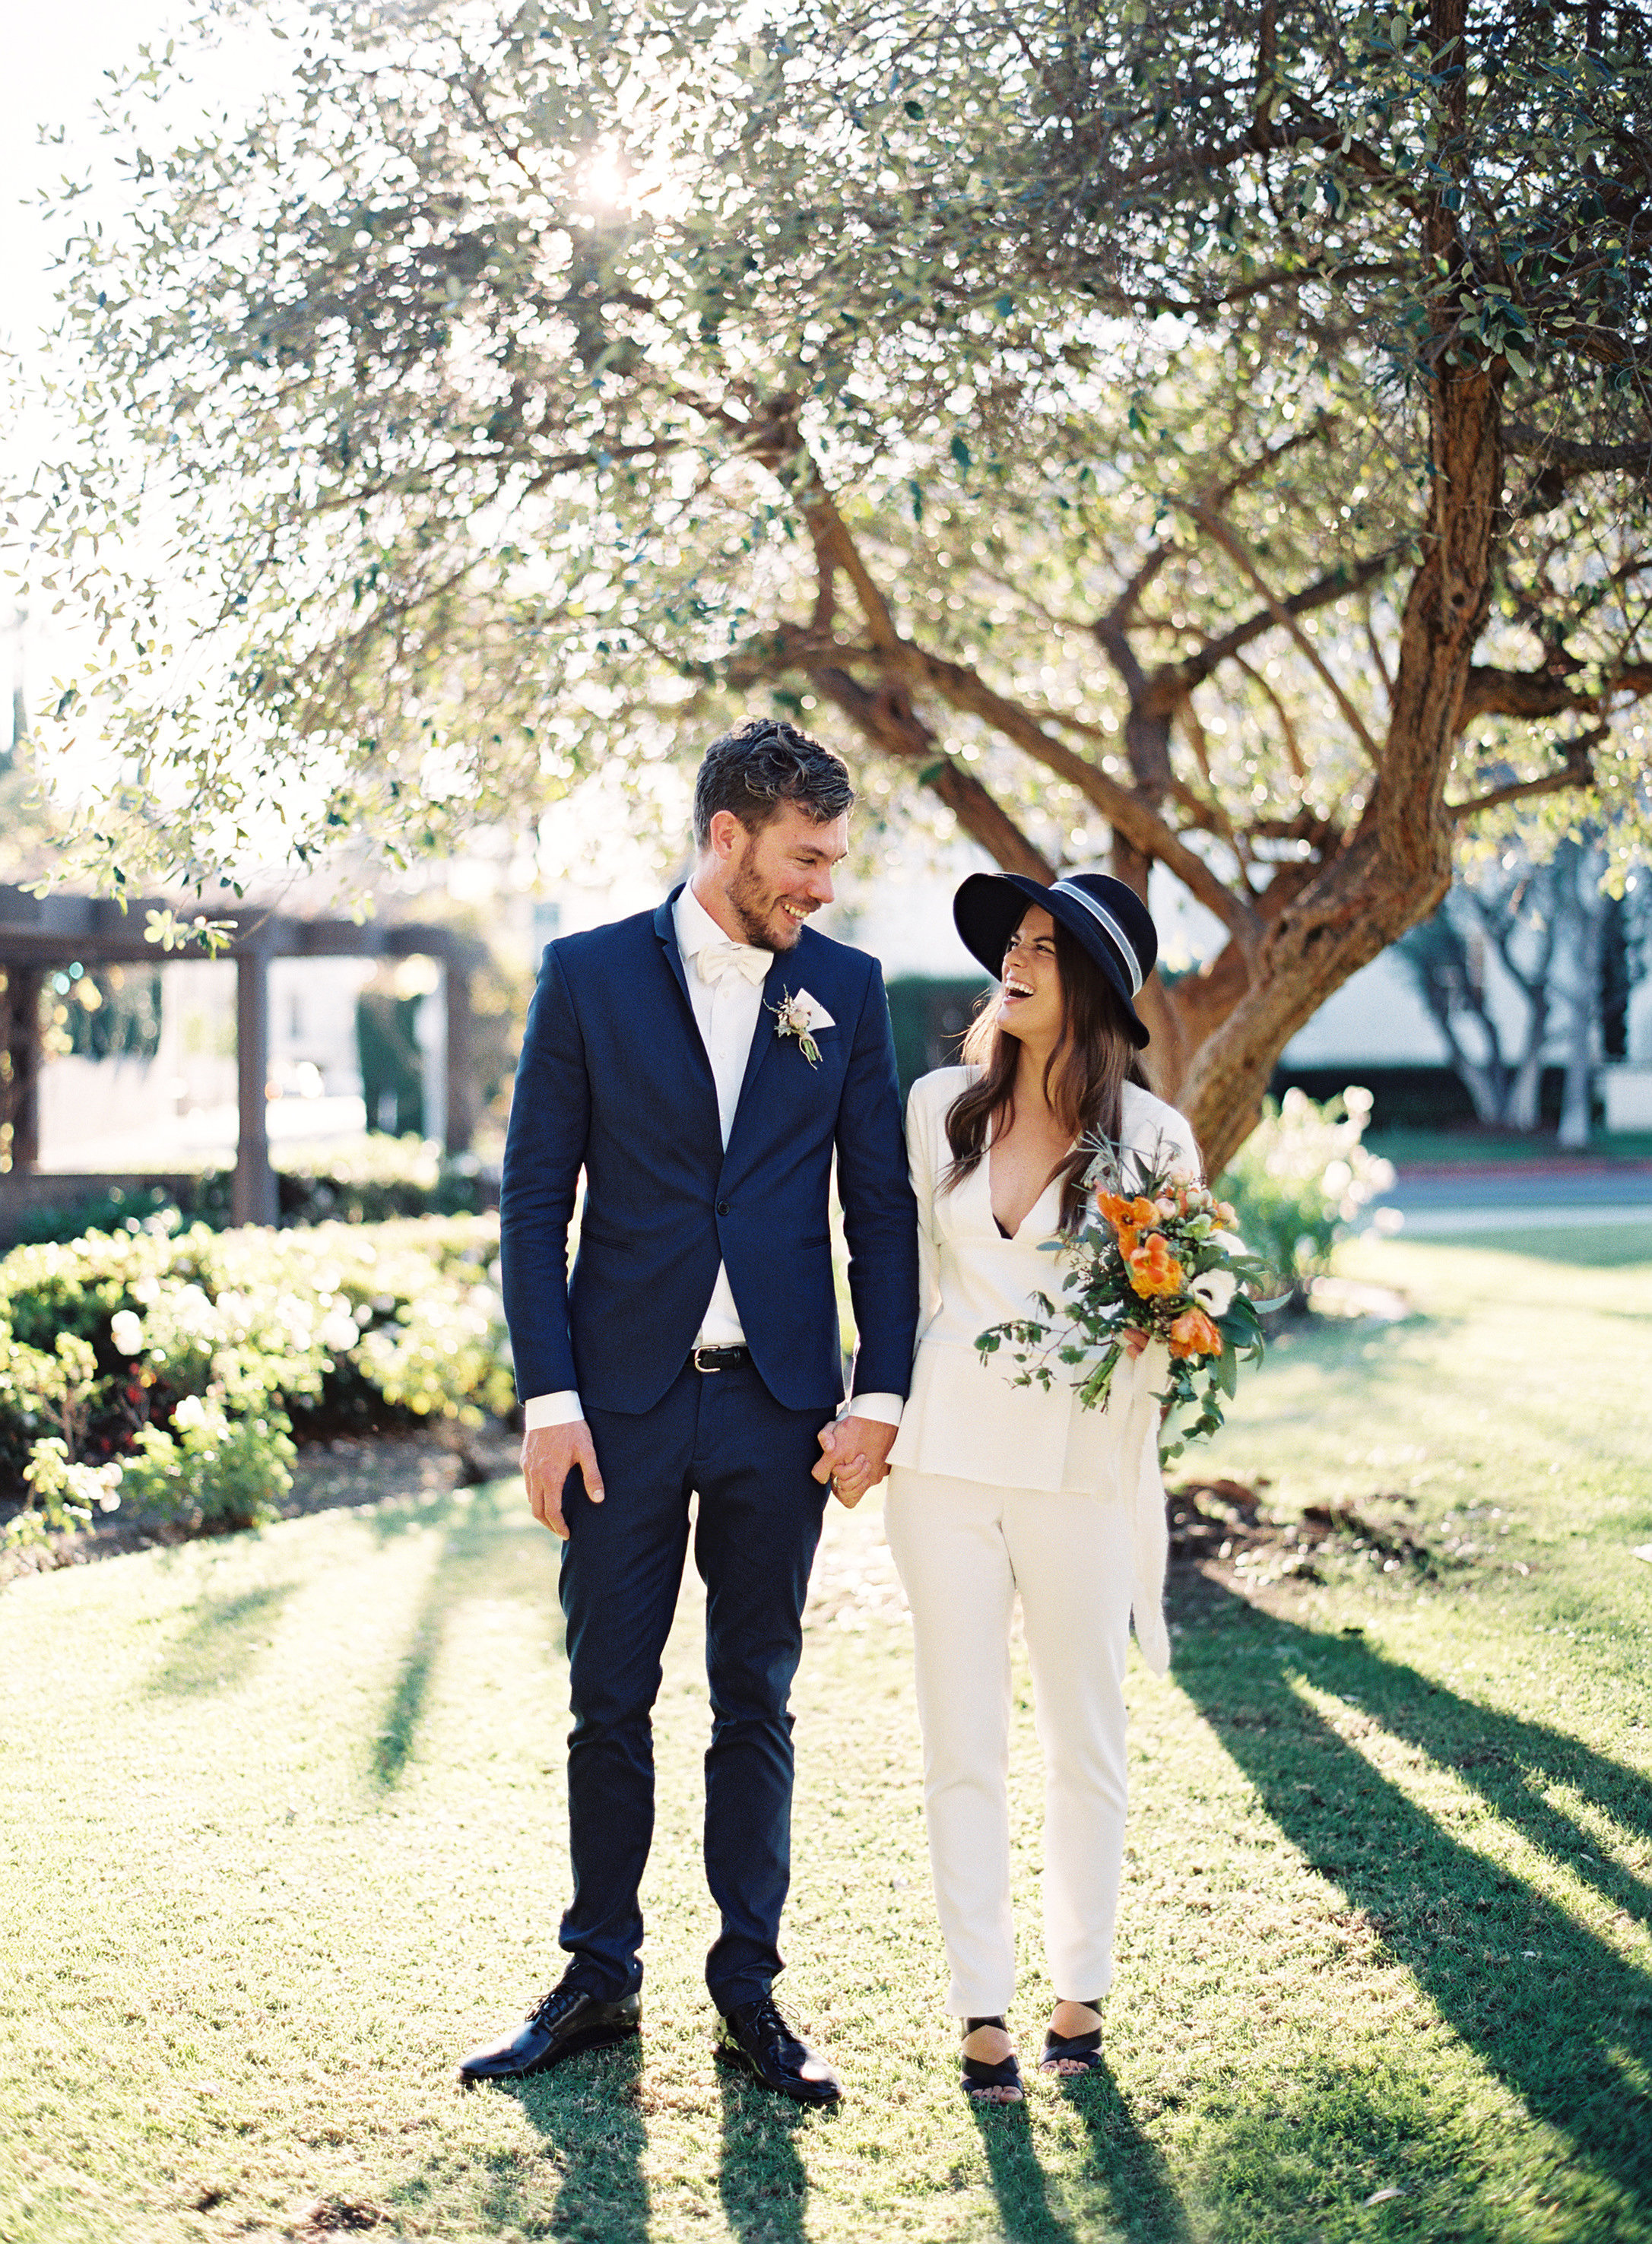 Men's Wedding Suit Ideas, Styles and Attire: Find an Outfit That Matches  the Dress Code - JONES - The home of fashion, culture and style.